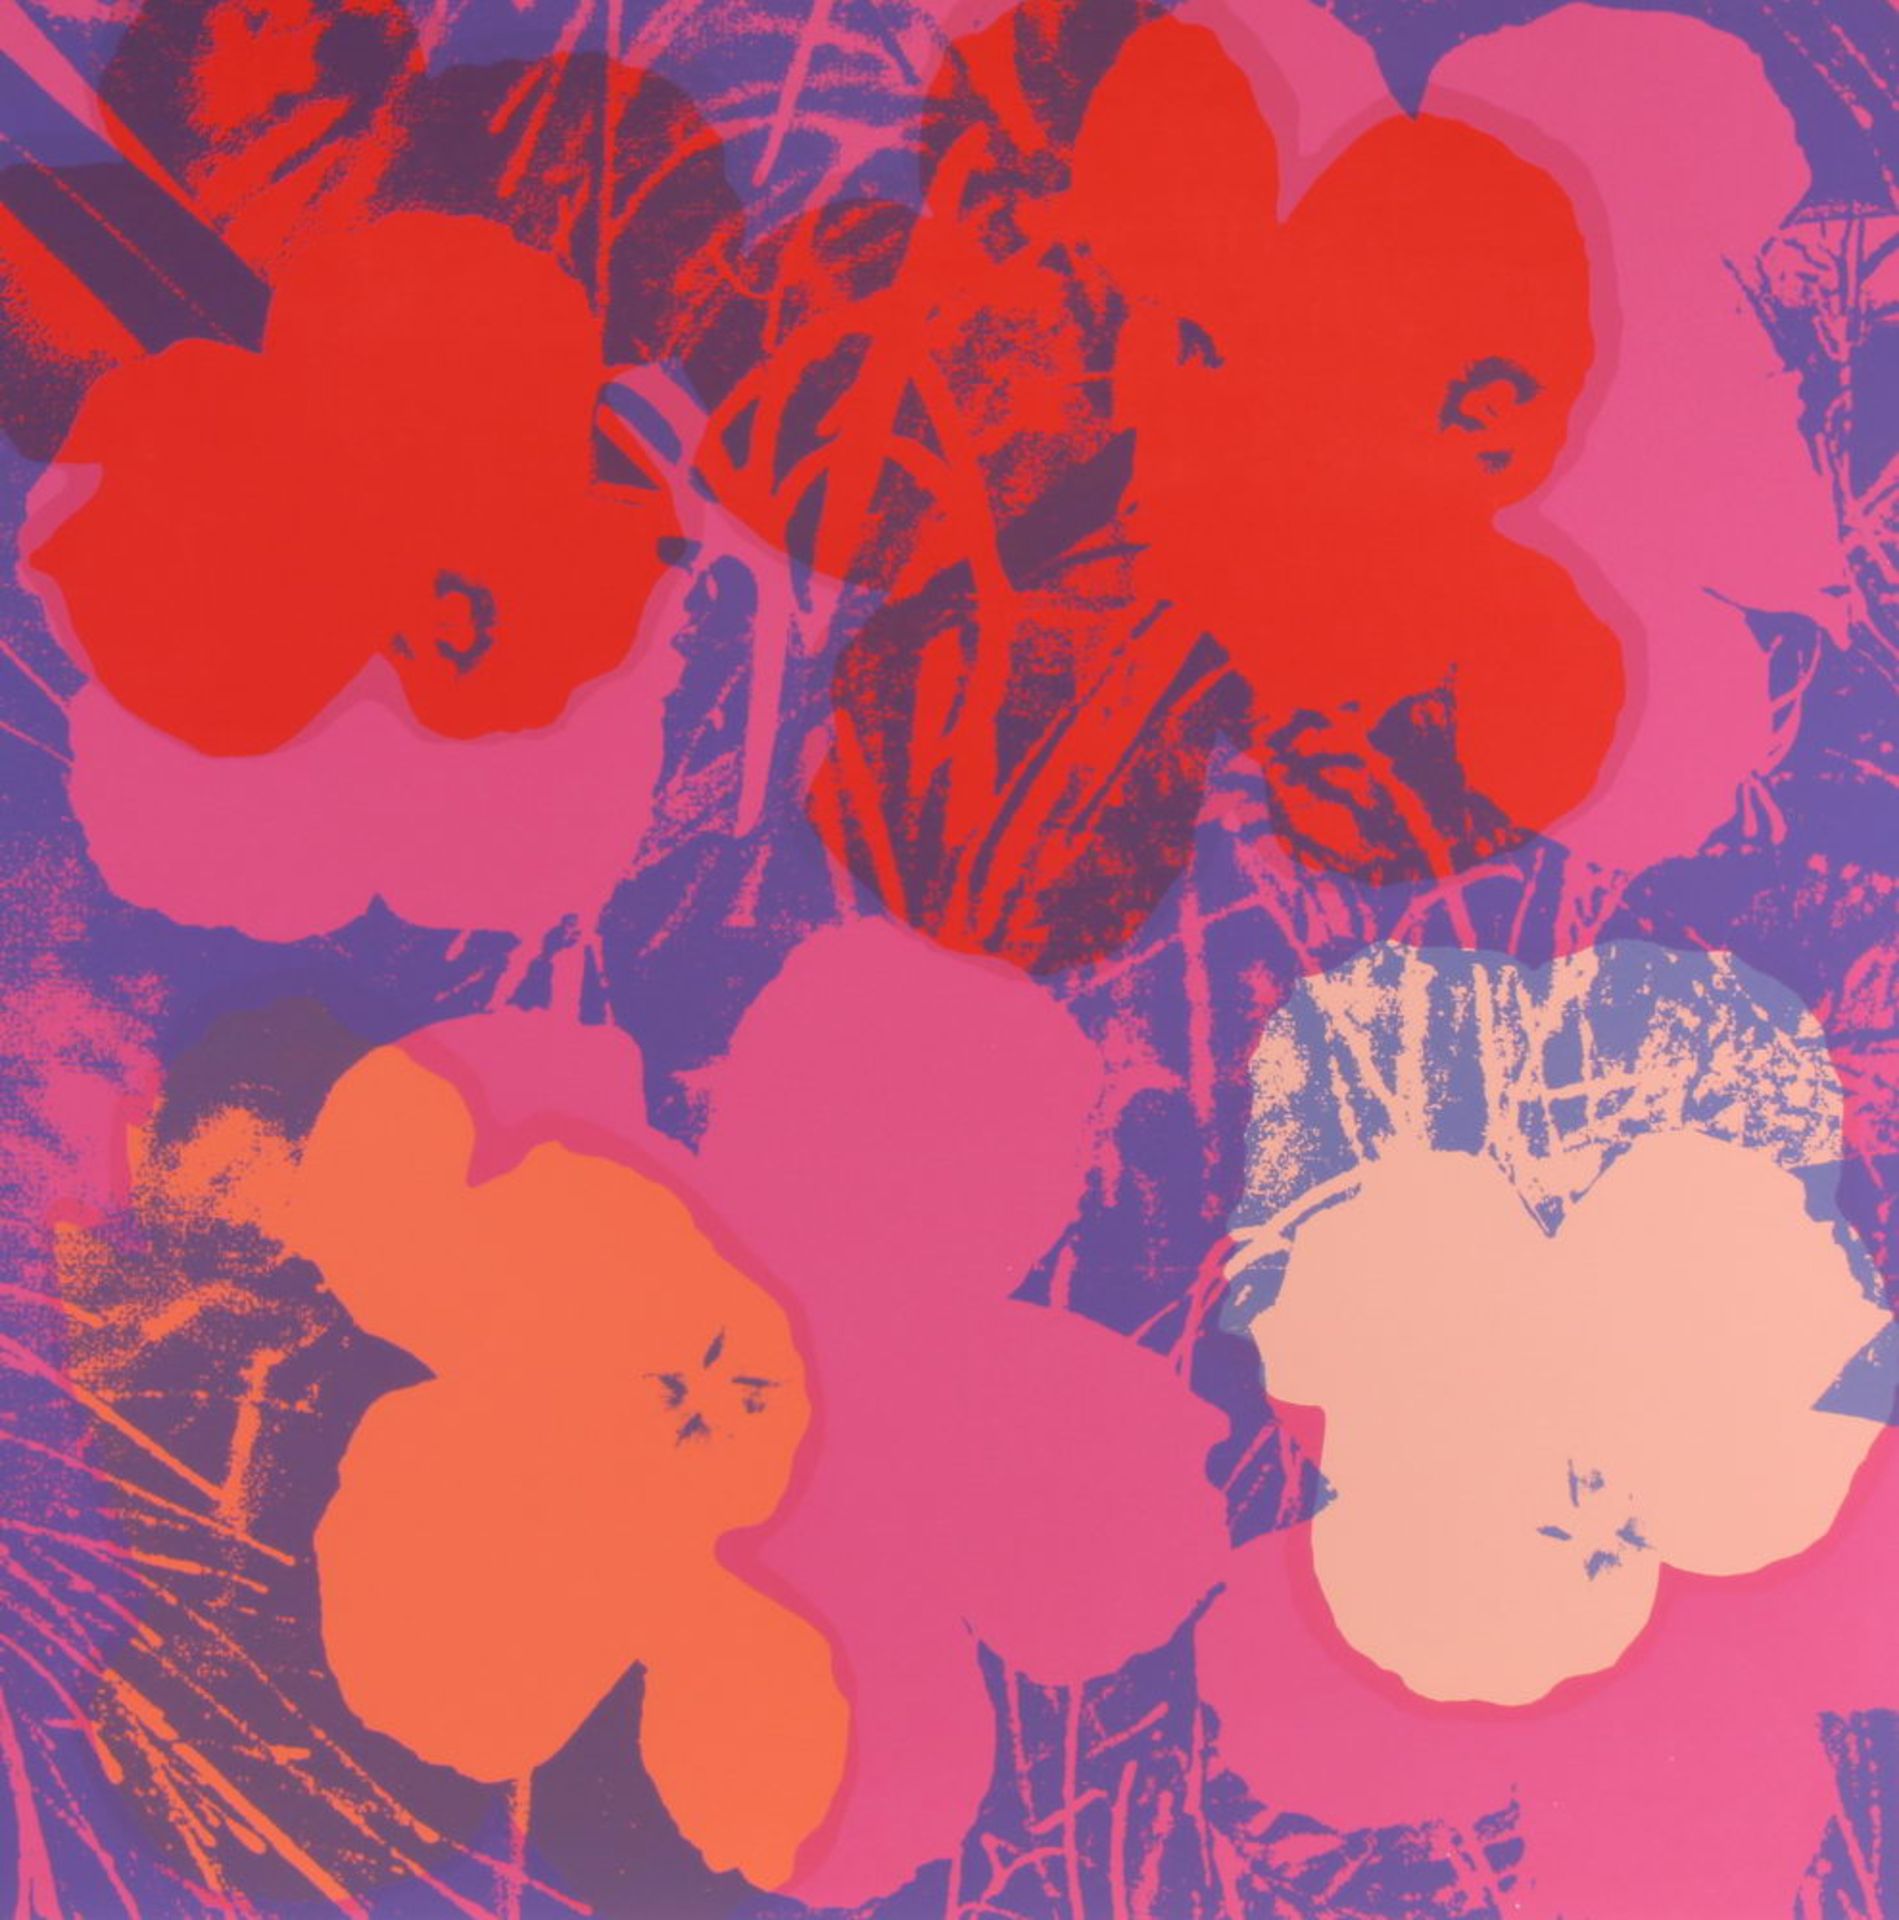 Warhol, Andy (1928 Pittsburgh - 1987 New York), 10 Farbserigrafien, "Flowers", published by Sunday - Image 2 of 10